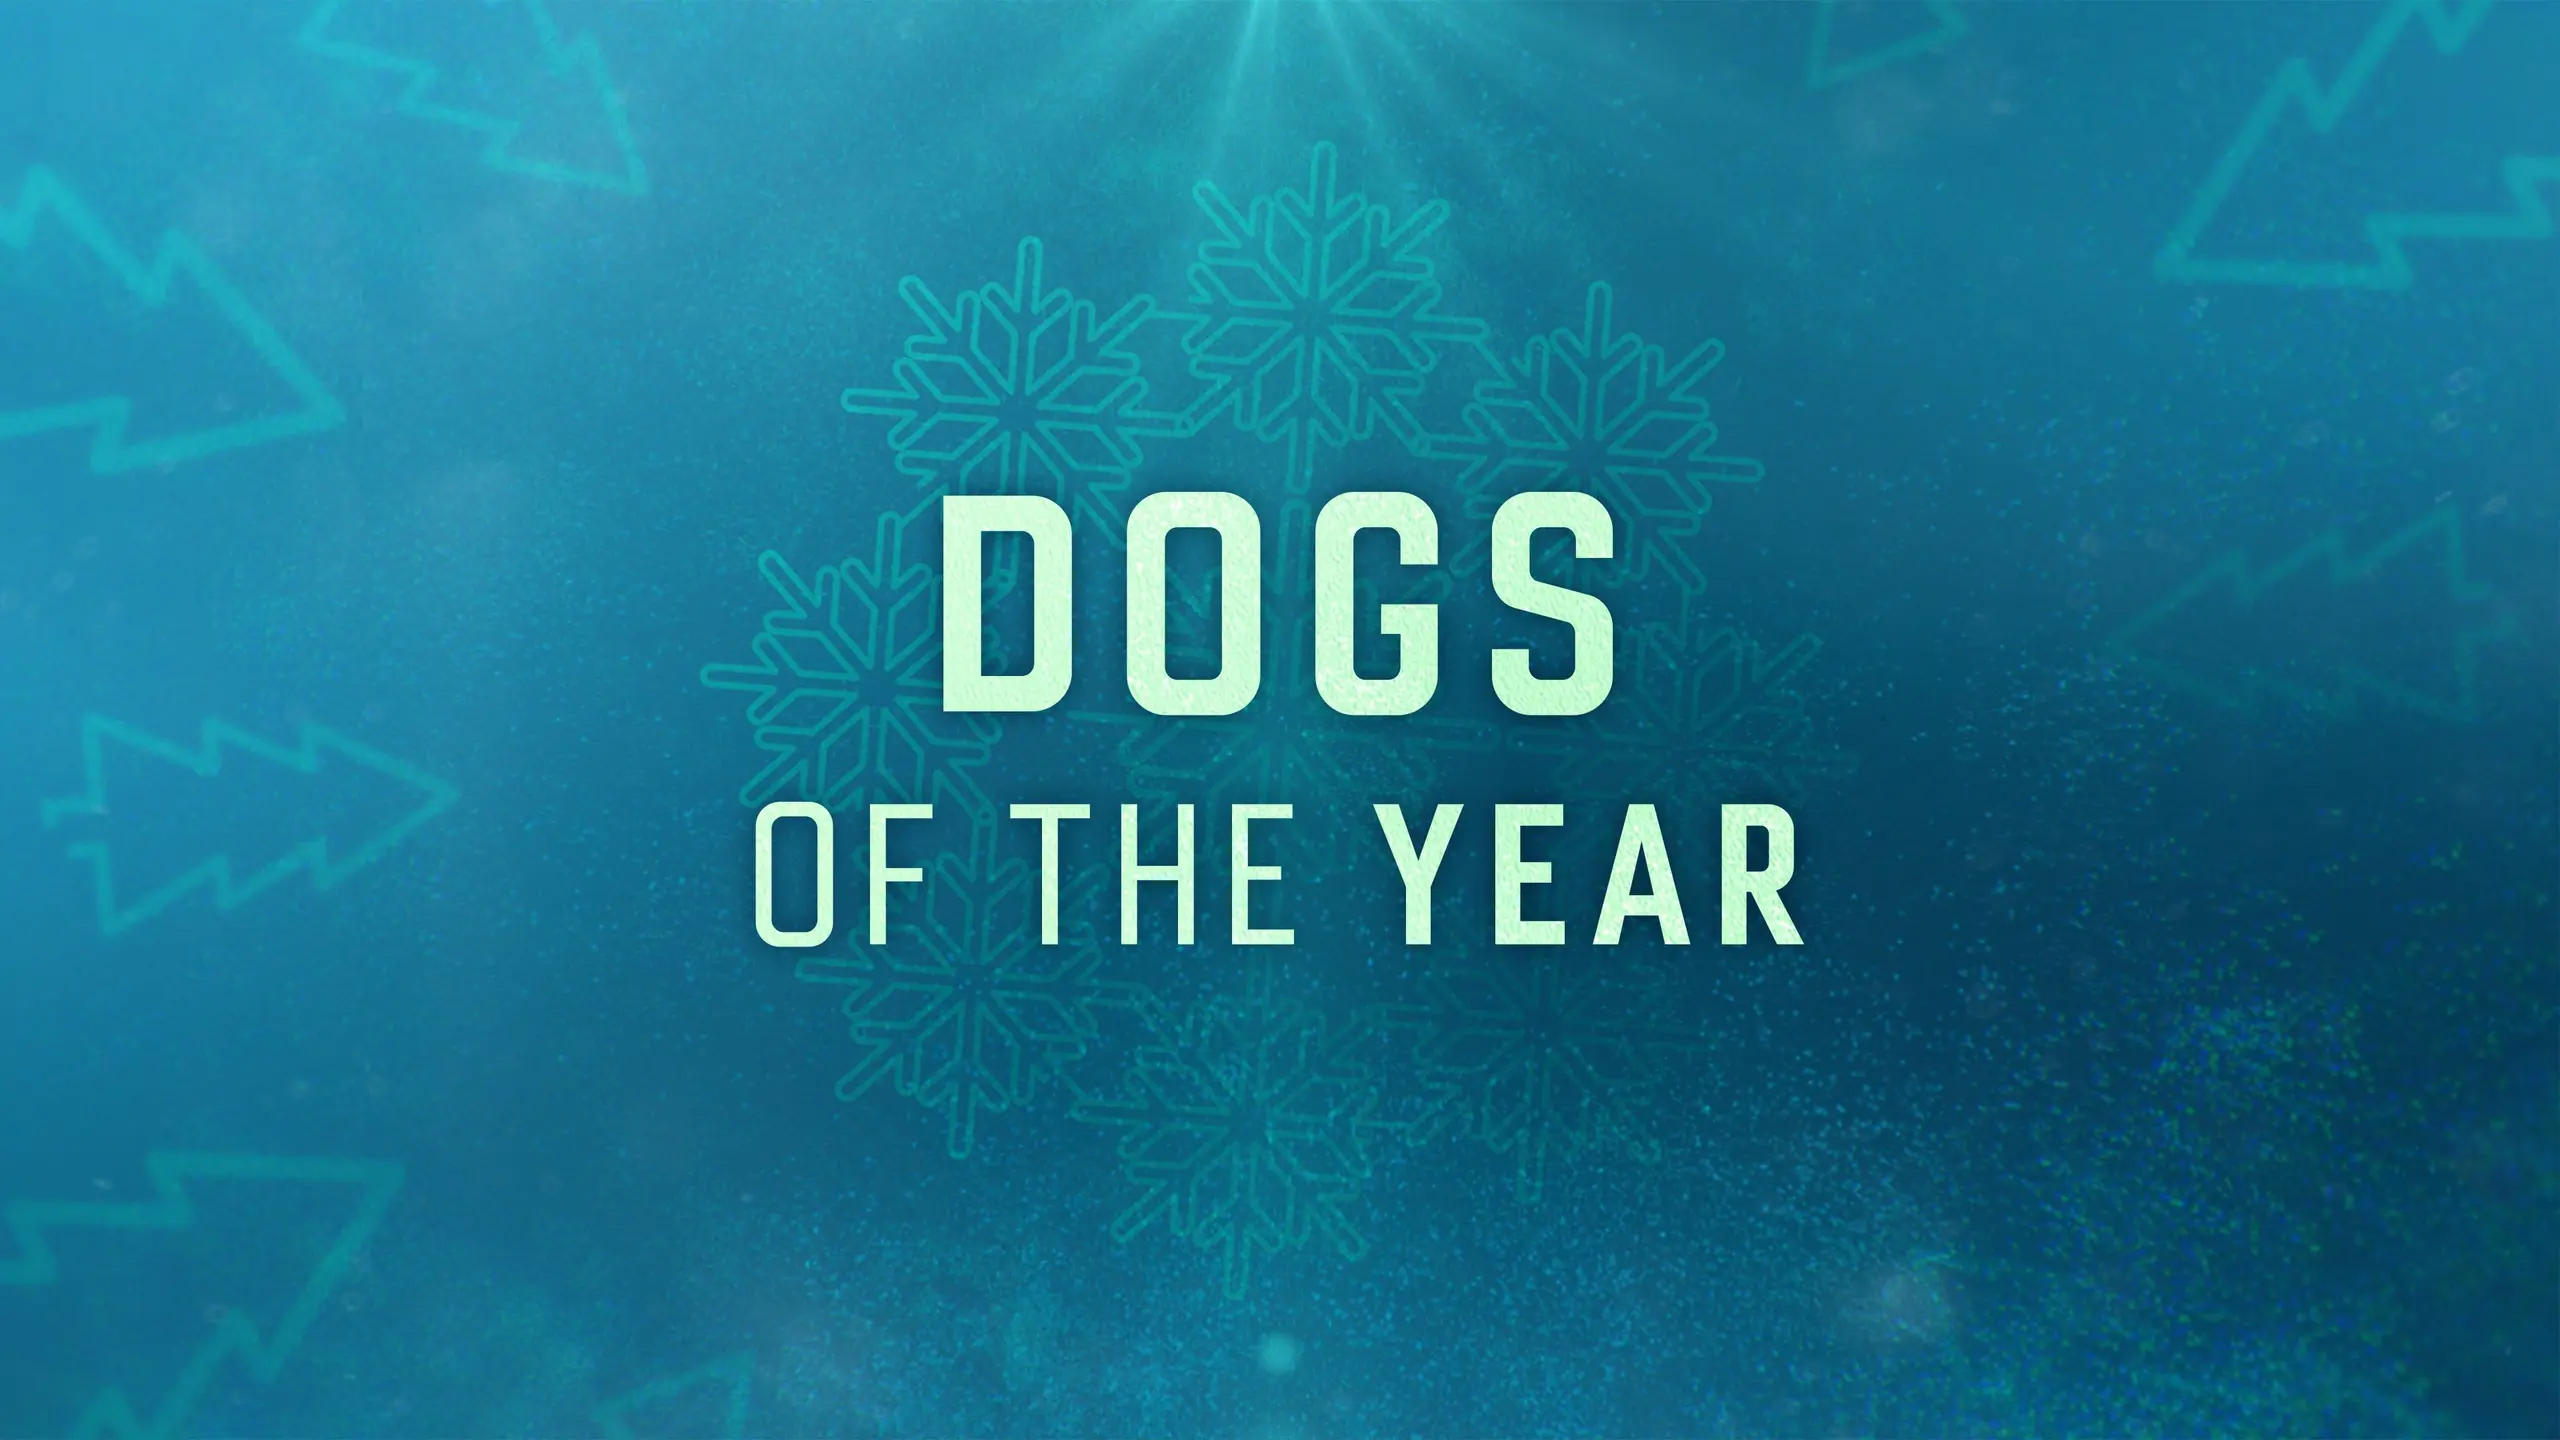 Dogs of the Year